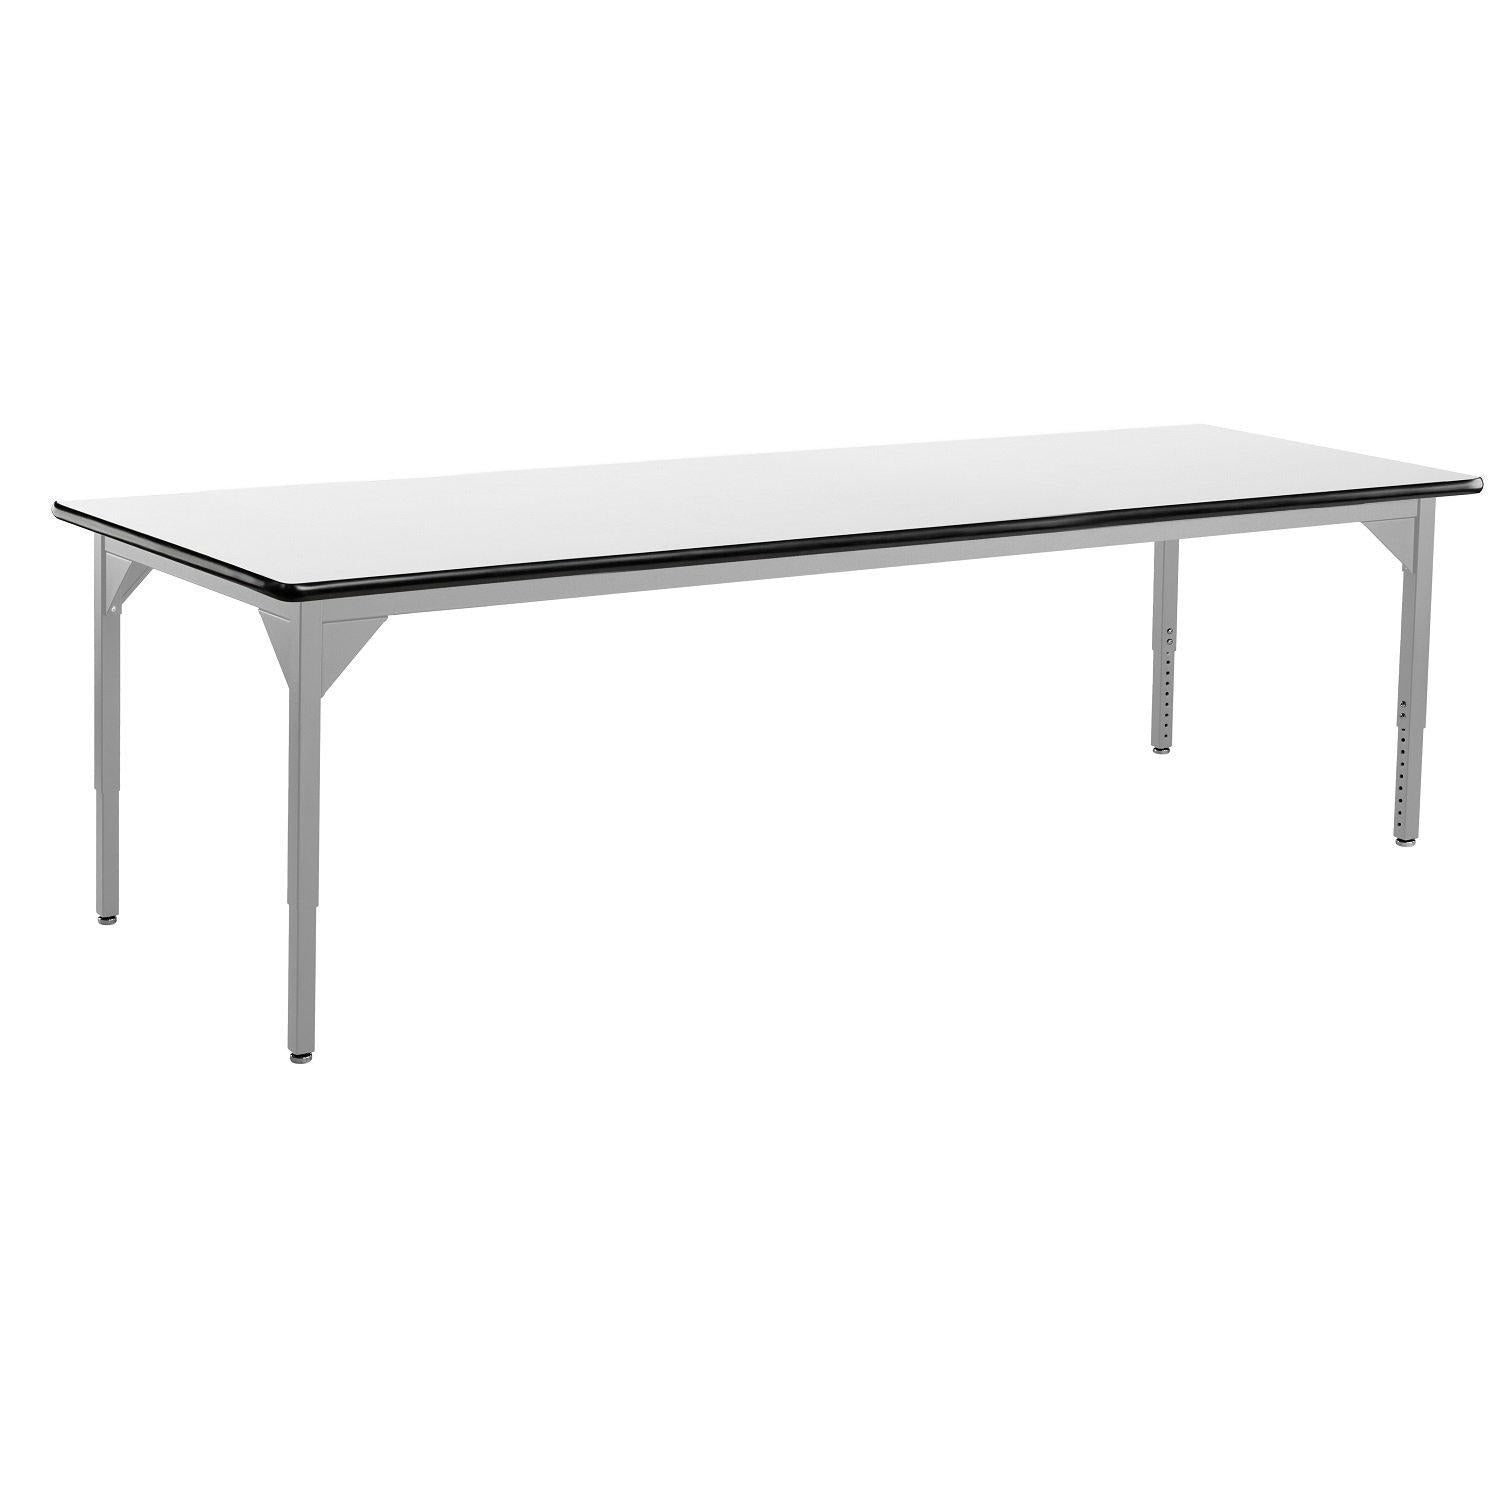 Heavy-Duty Height-Adjustable Utility Table, Soft Grey Frame, 42" x 72", Whiteboard High-Pressure Laminate Top